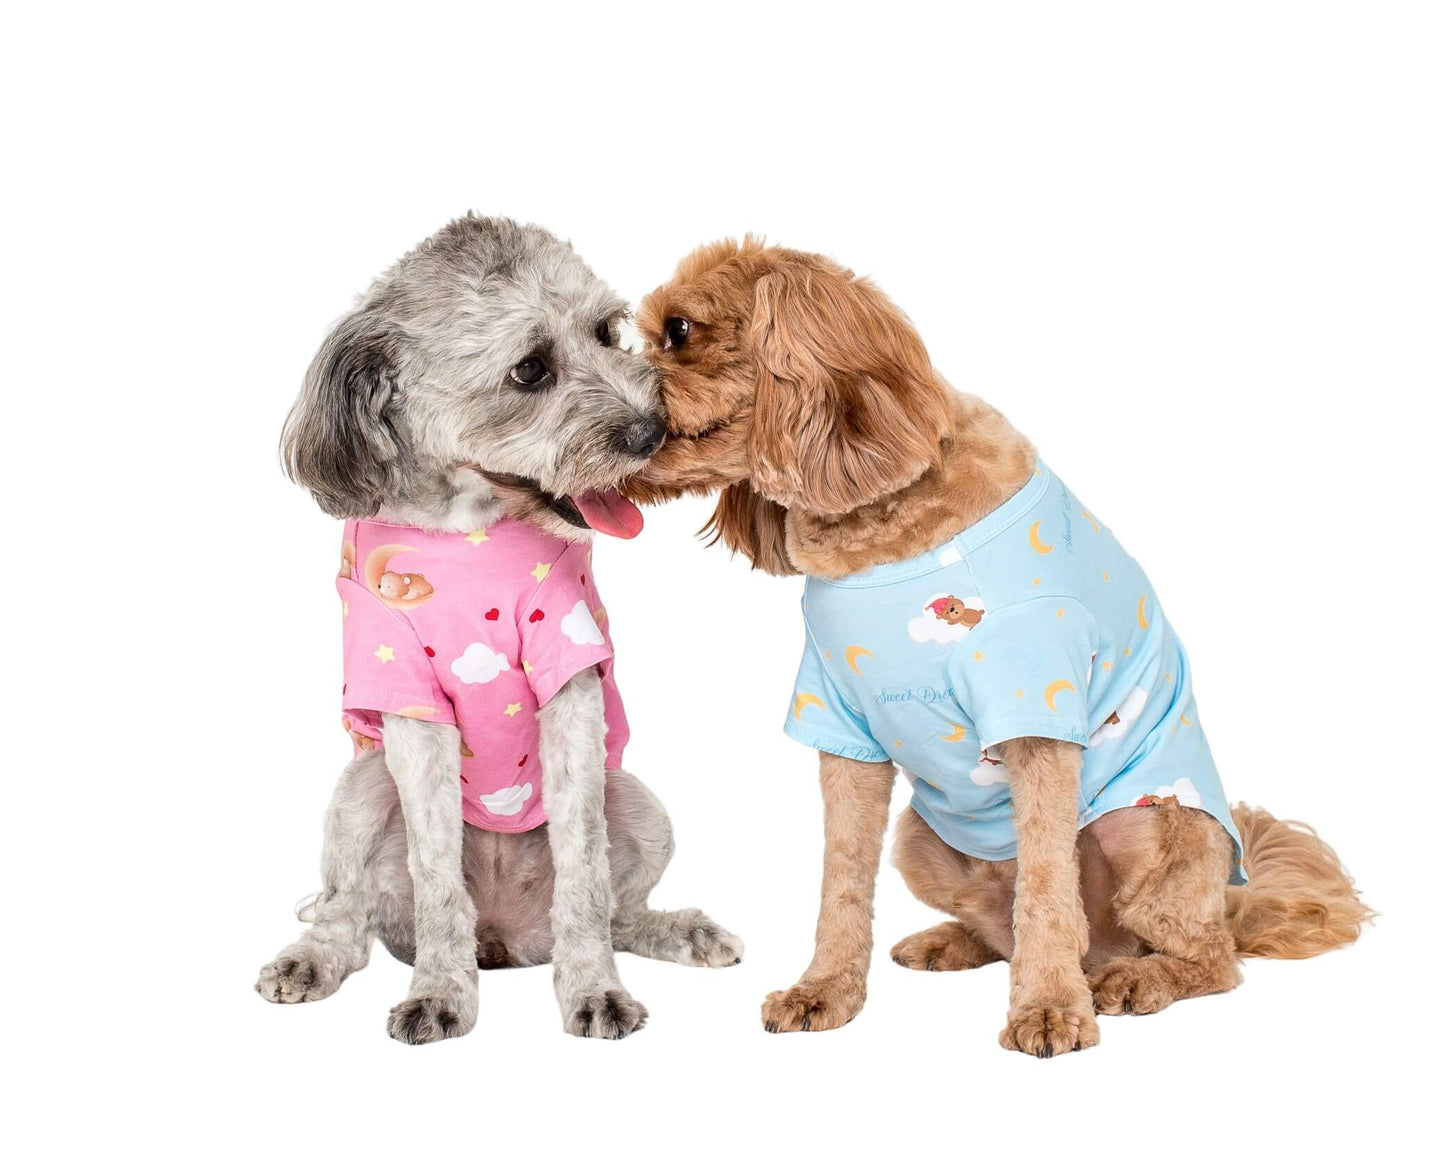 Two Cavoodles wearing Lil dreamer pink and blue dog Pyjamas.